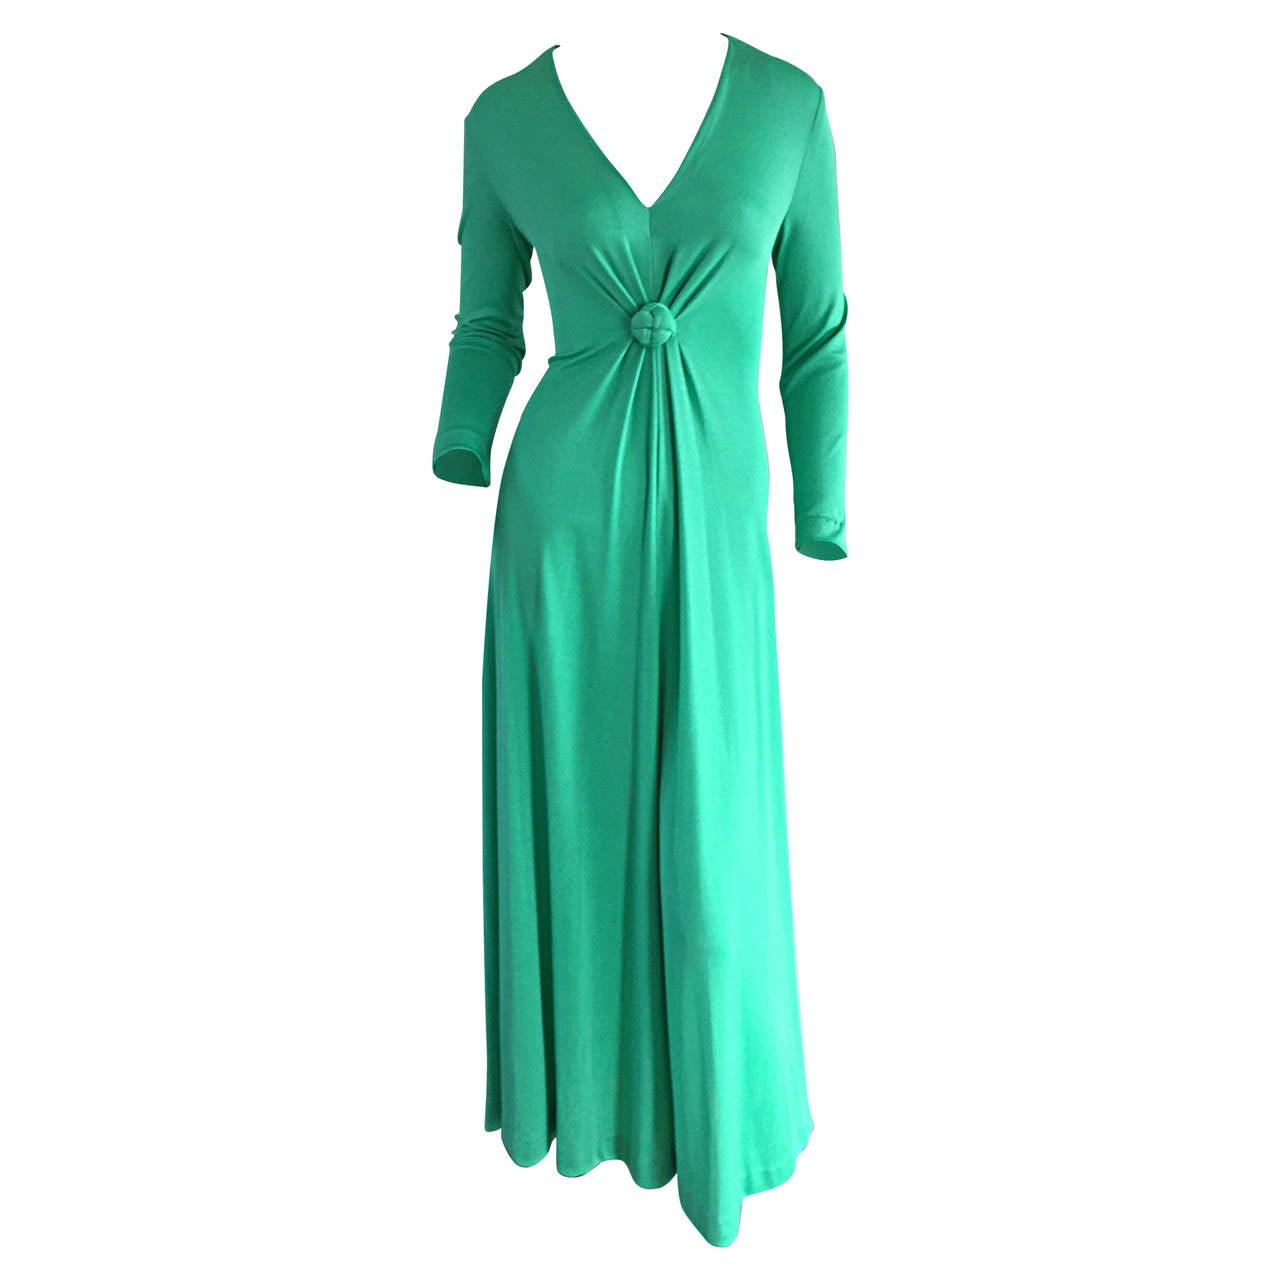 Rare Early 1970s Vintage Frederick's of Hollywood Kelly Green Jersey Maxi Dress